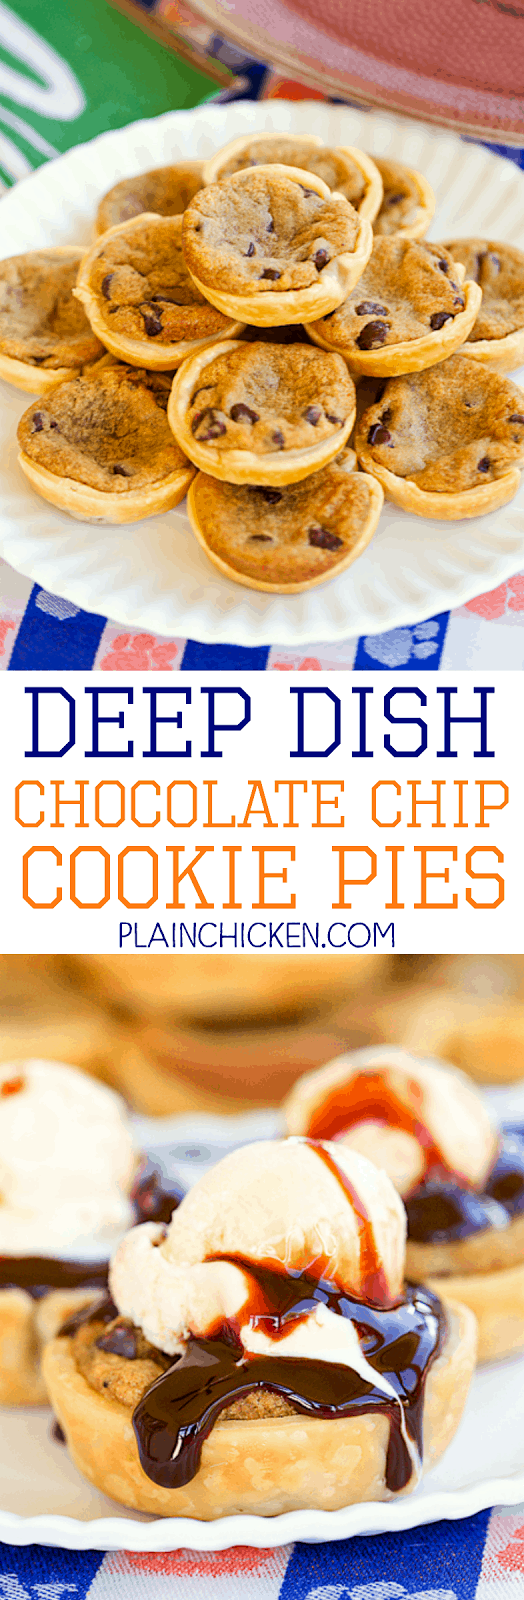 Deep Dish Chocolate Chip Cookie Pies - only 2 ingredients!! SO easy and SOOOO delicious! Top with ice cream and chocolate sauce to put these over the top. Great for parties and cookie swaps!